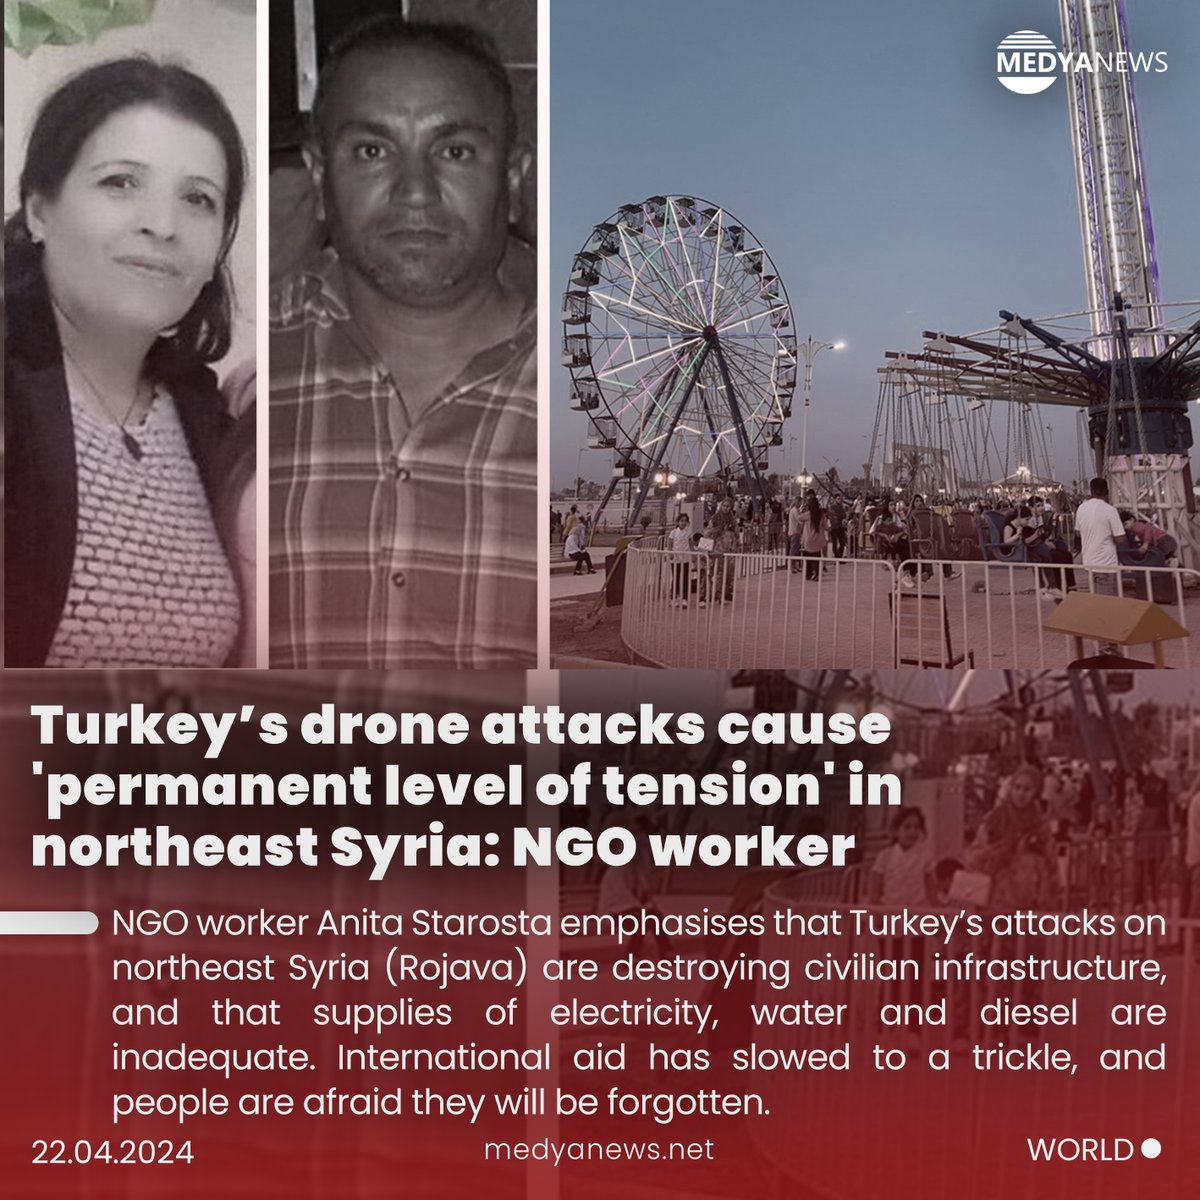 NGO worker Anita Starosta (@StarostaAnita) that #Turkey’s attacks on northeast #Syria (#Rojava) are destroying civilian infrastructure, and that supplies of electricity, water and diesel are inadequate. (buff.ly/3Ua5x8f)